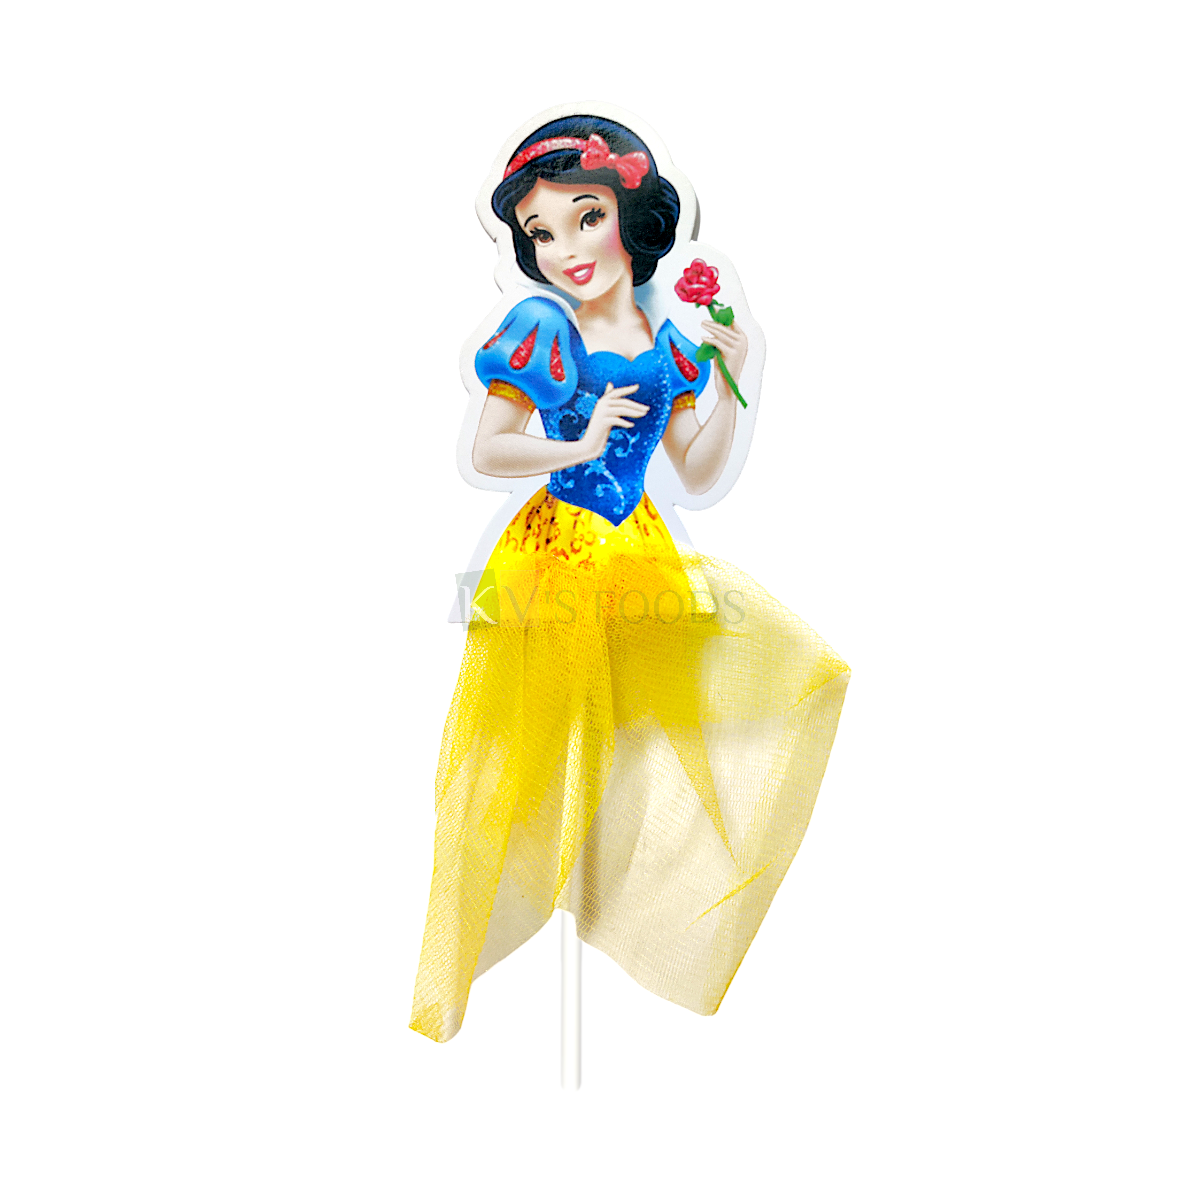 1 PC Yellow Colour Snow White Princess Net Skirt Girl Lady Women Paper Cake Topper for Bride Wedding, Mother's Day, Women's Day Theme, Pull Me Up Doll Cakes Daughter Birthday Party DIY Cake Decoration